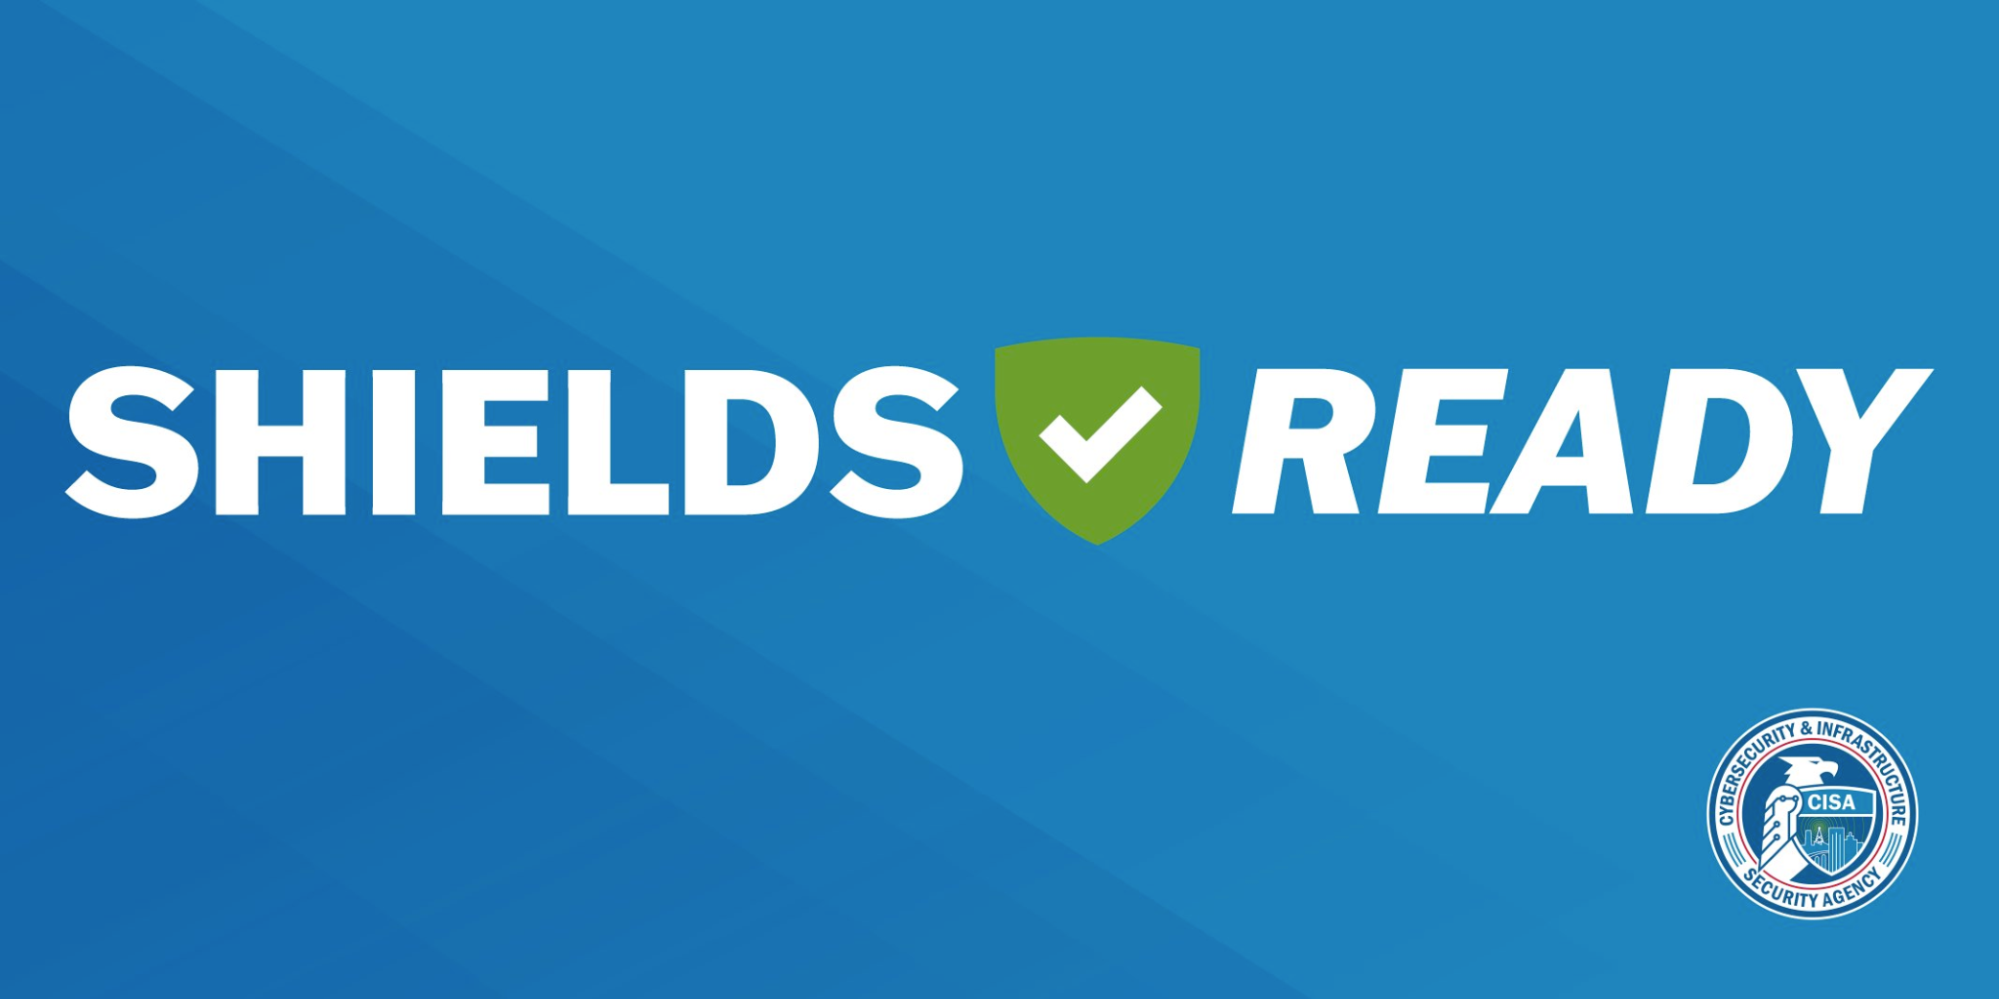 “Shields Ready” campaign promotes critical infrastructure security